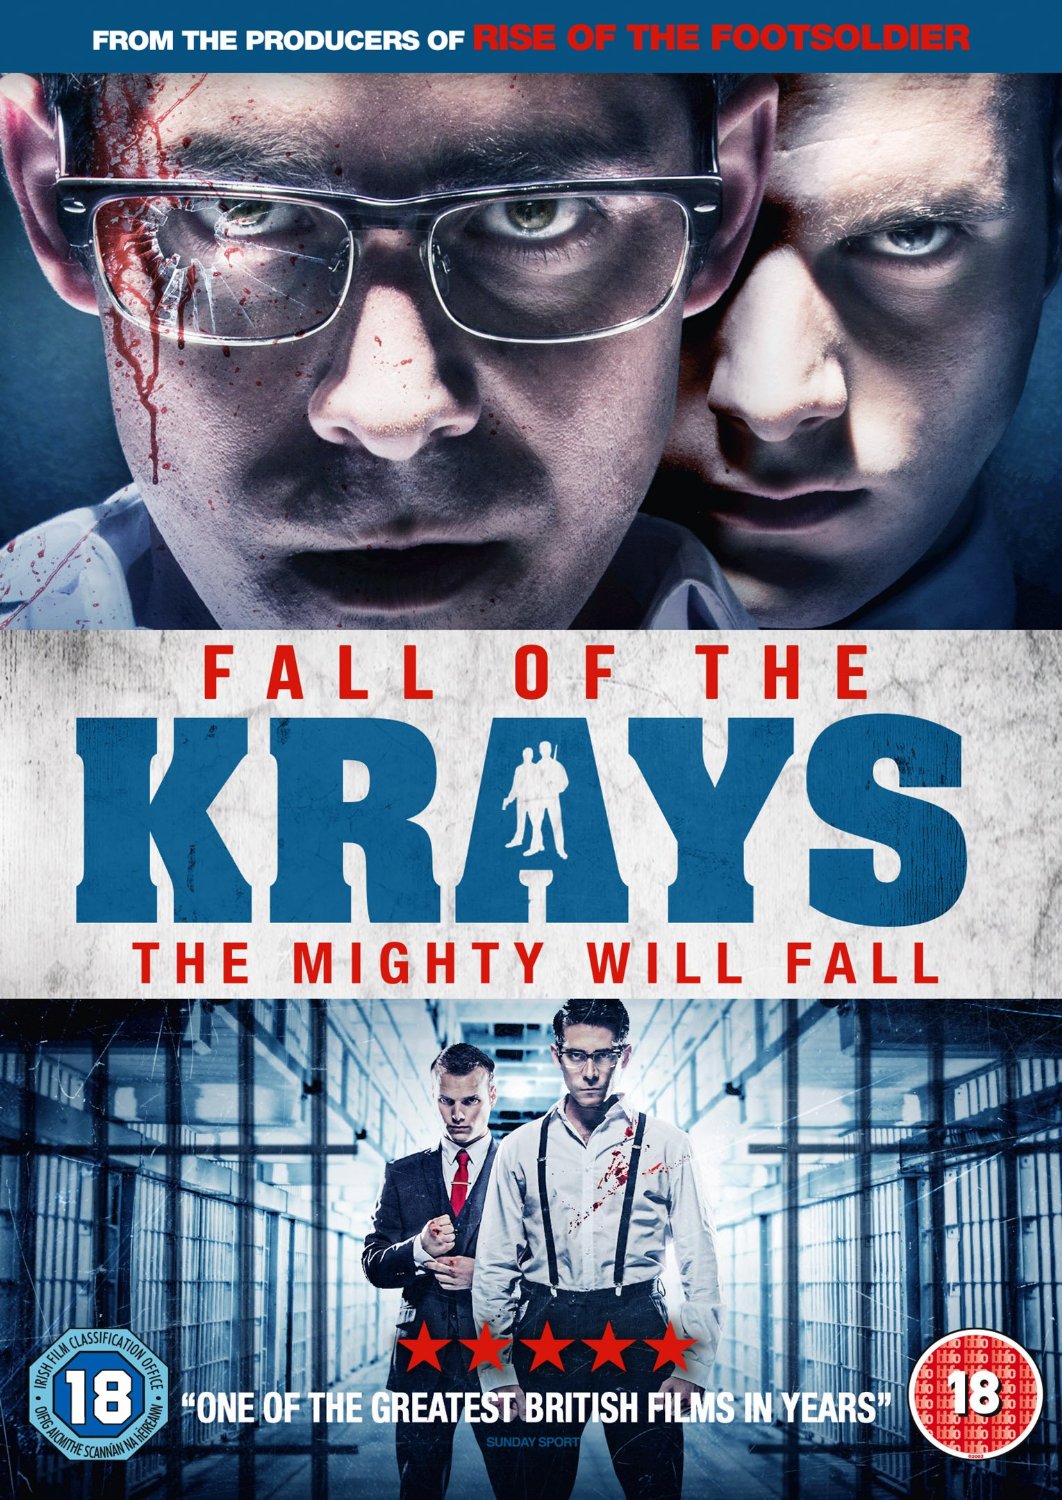 The Fall of the Krays 2016 - Full (HD)